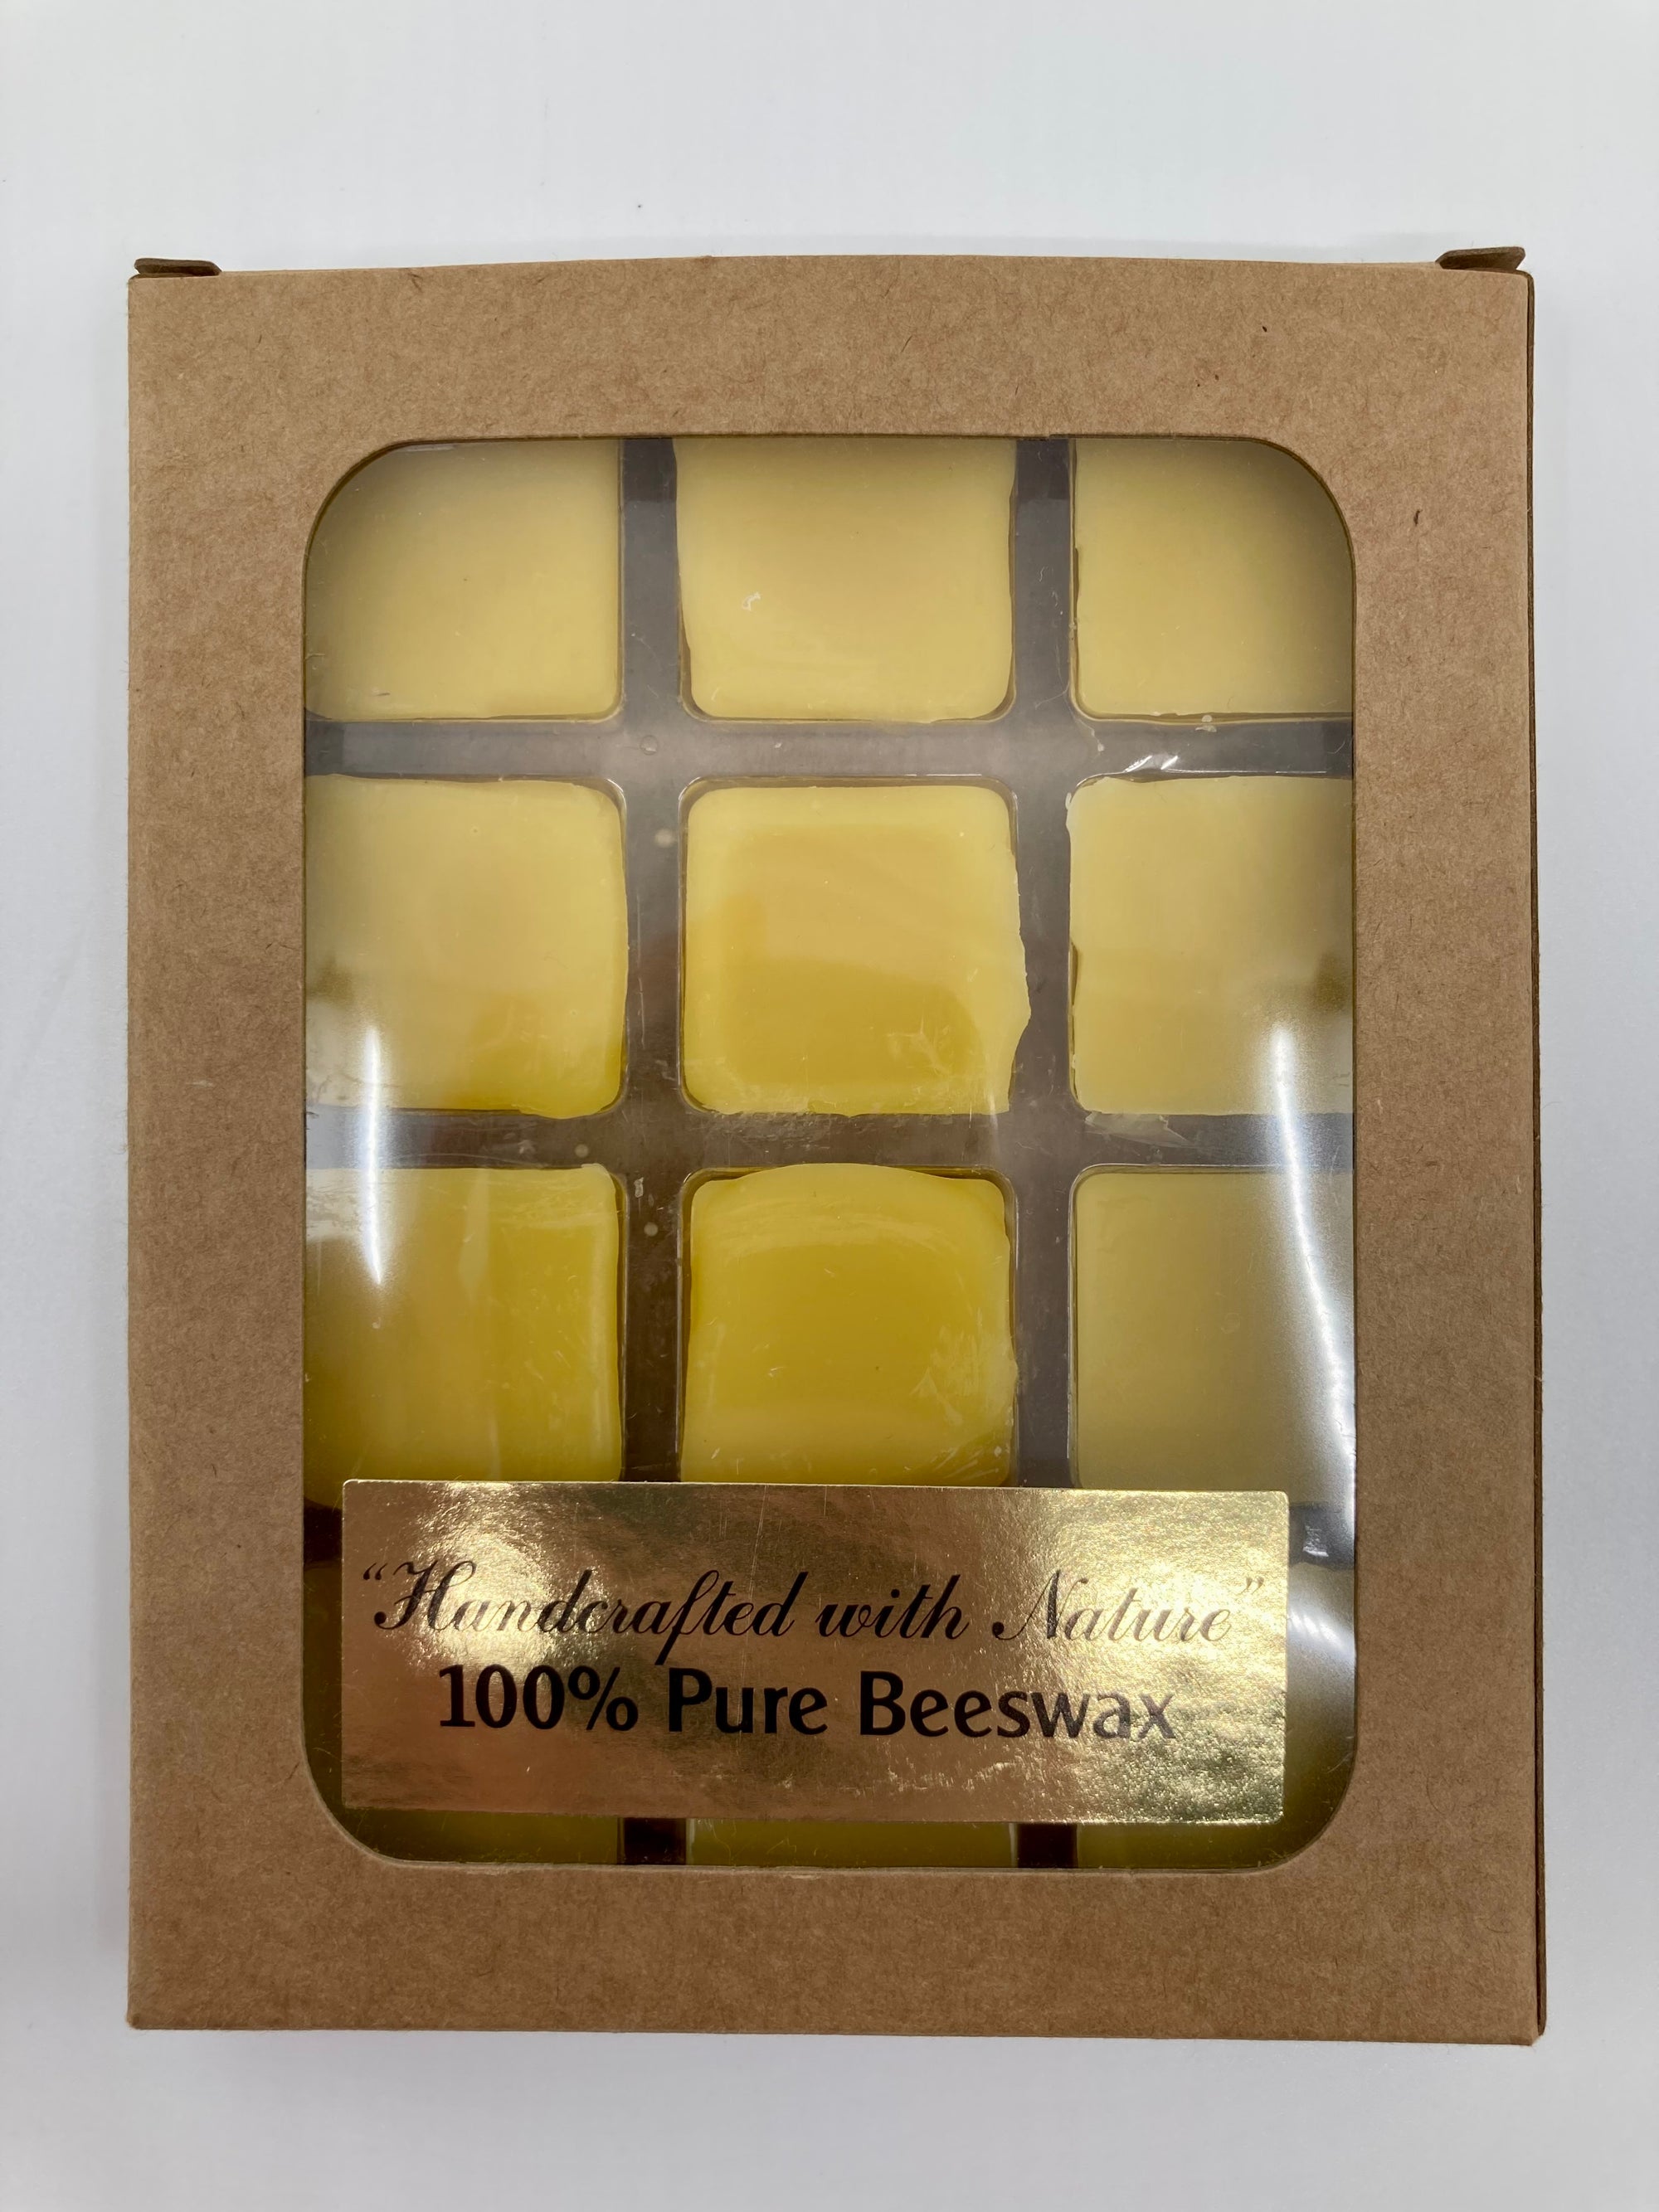 Beeswax melts are in the shape of a cube and each set comes with 12 100% beeswax melts.  Please note that beeswax is a natural resource and there may be variations in color from pale yellow to dark gold.